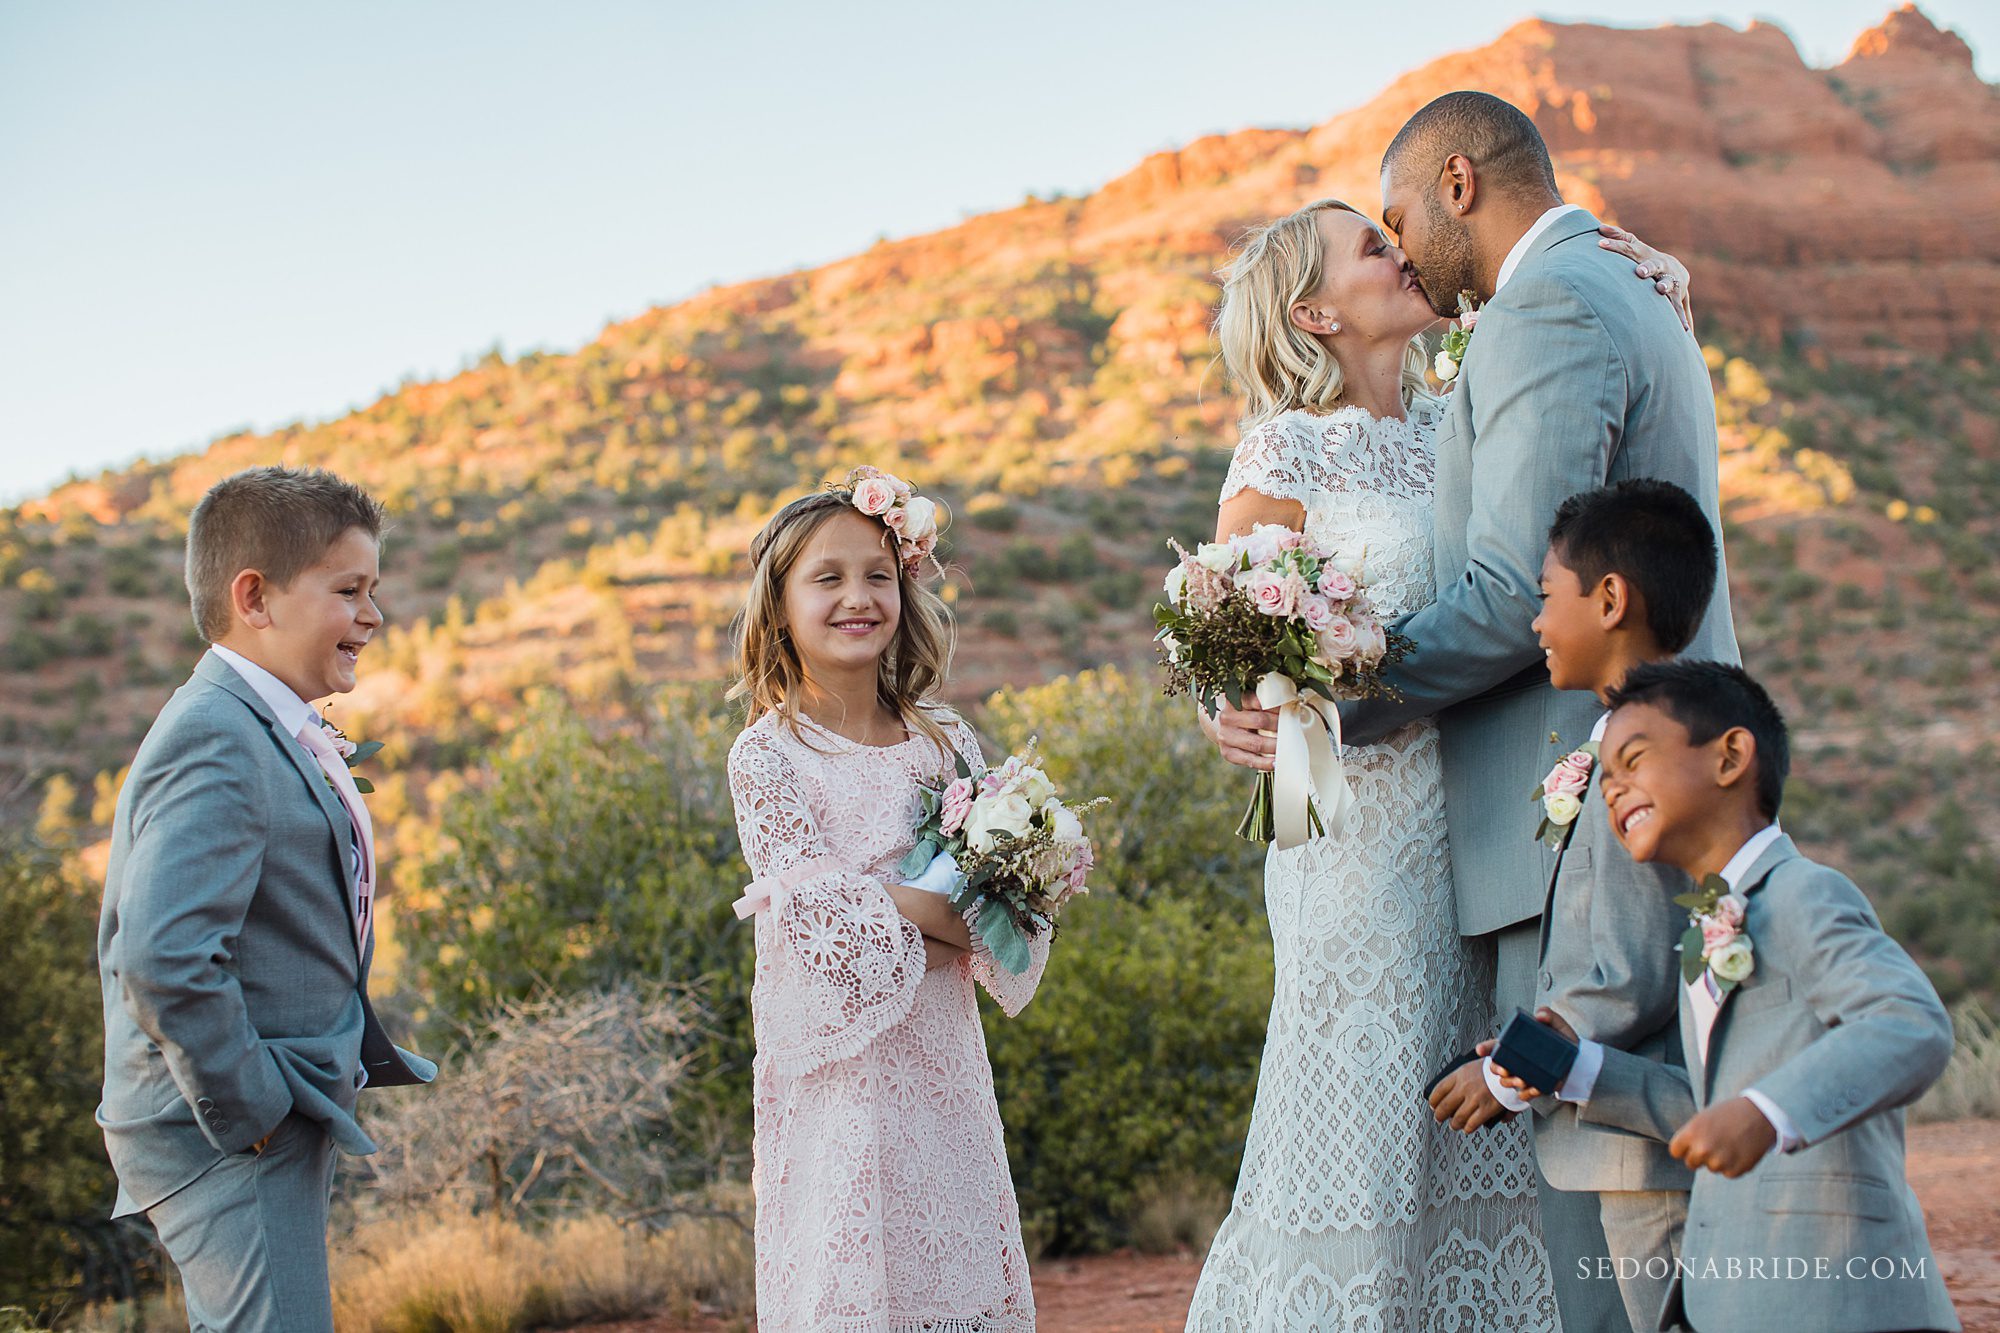 A bride and groom kiss while their kids smile during their elopement in Sedona